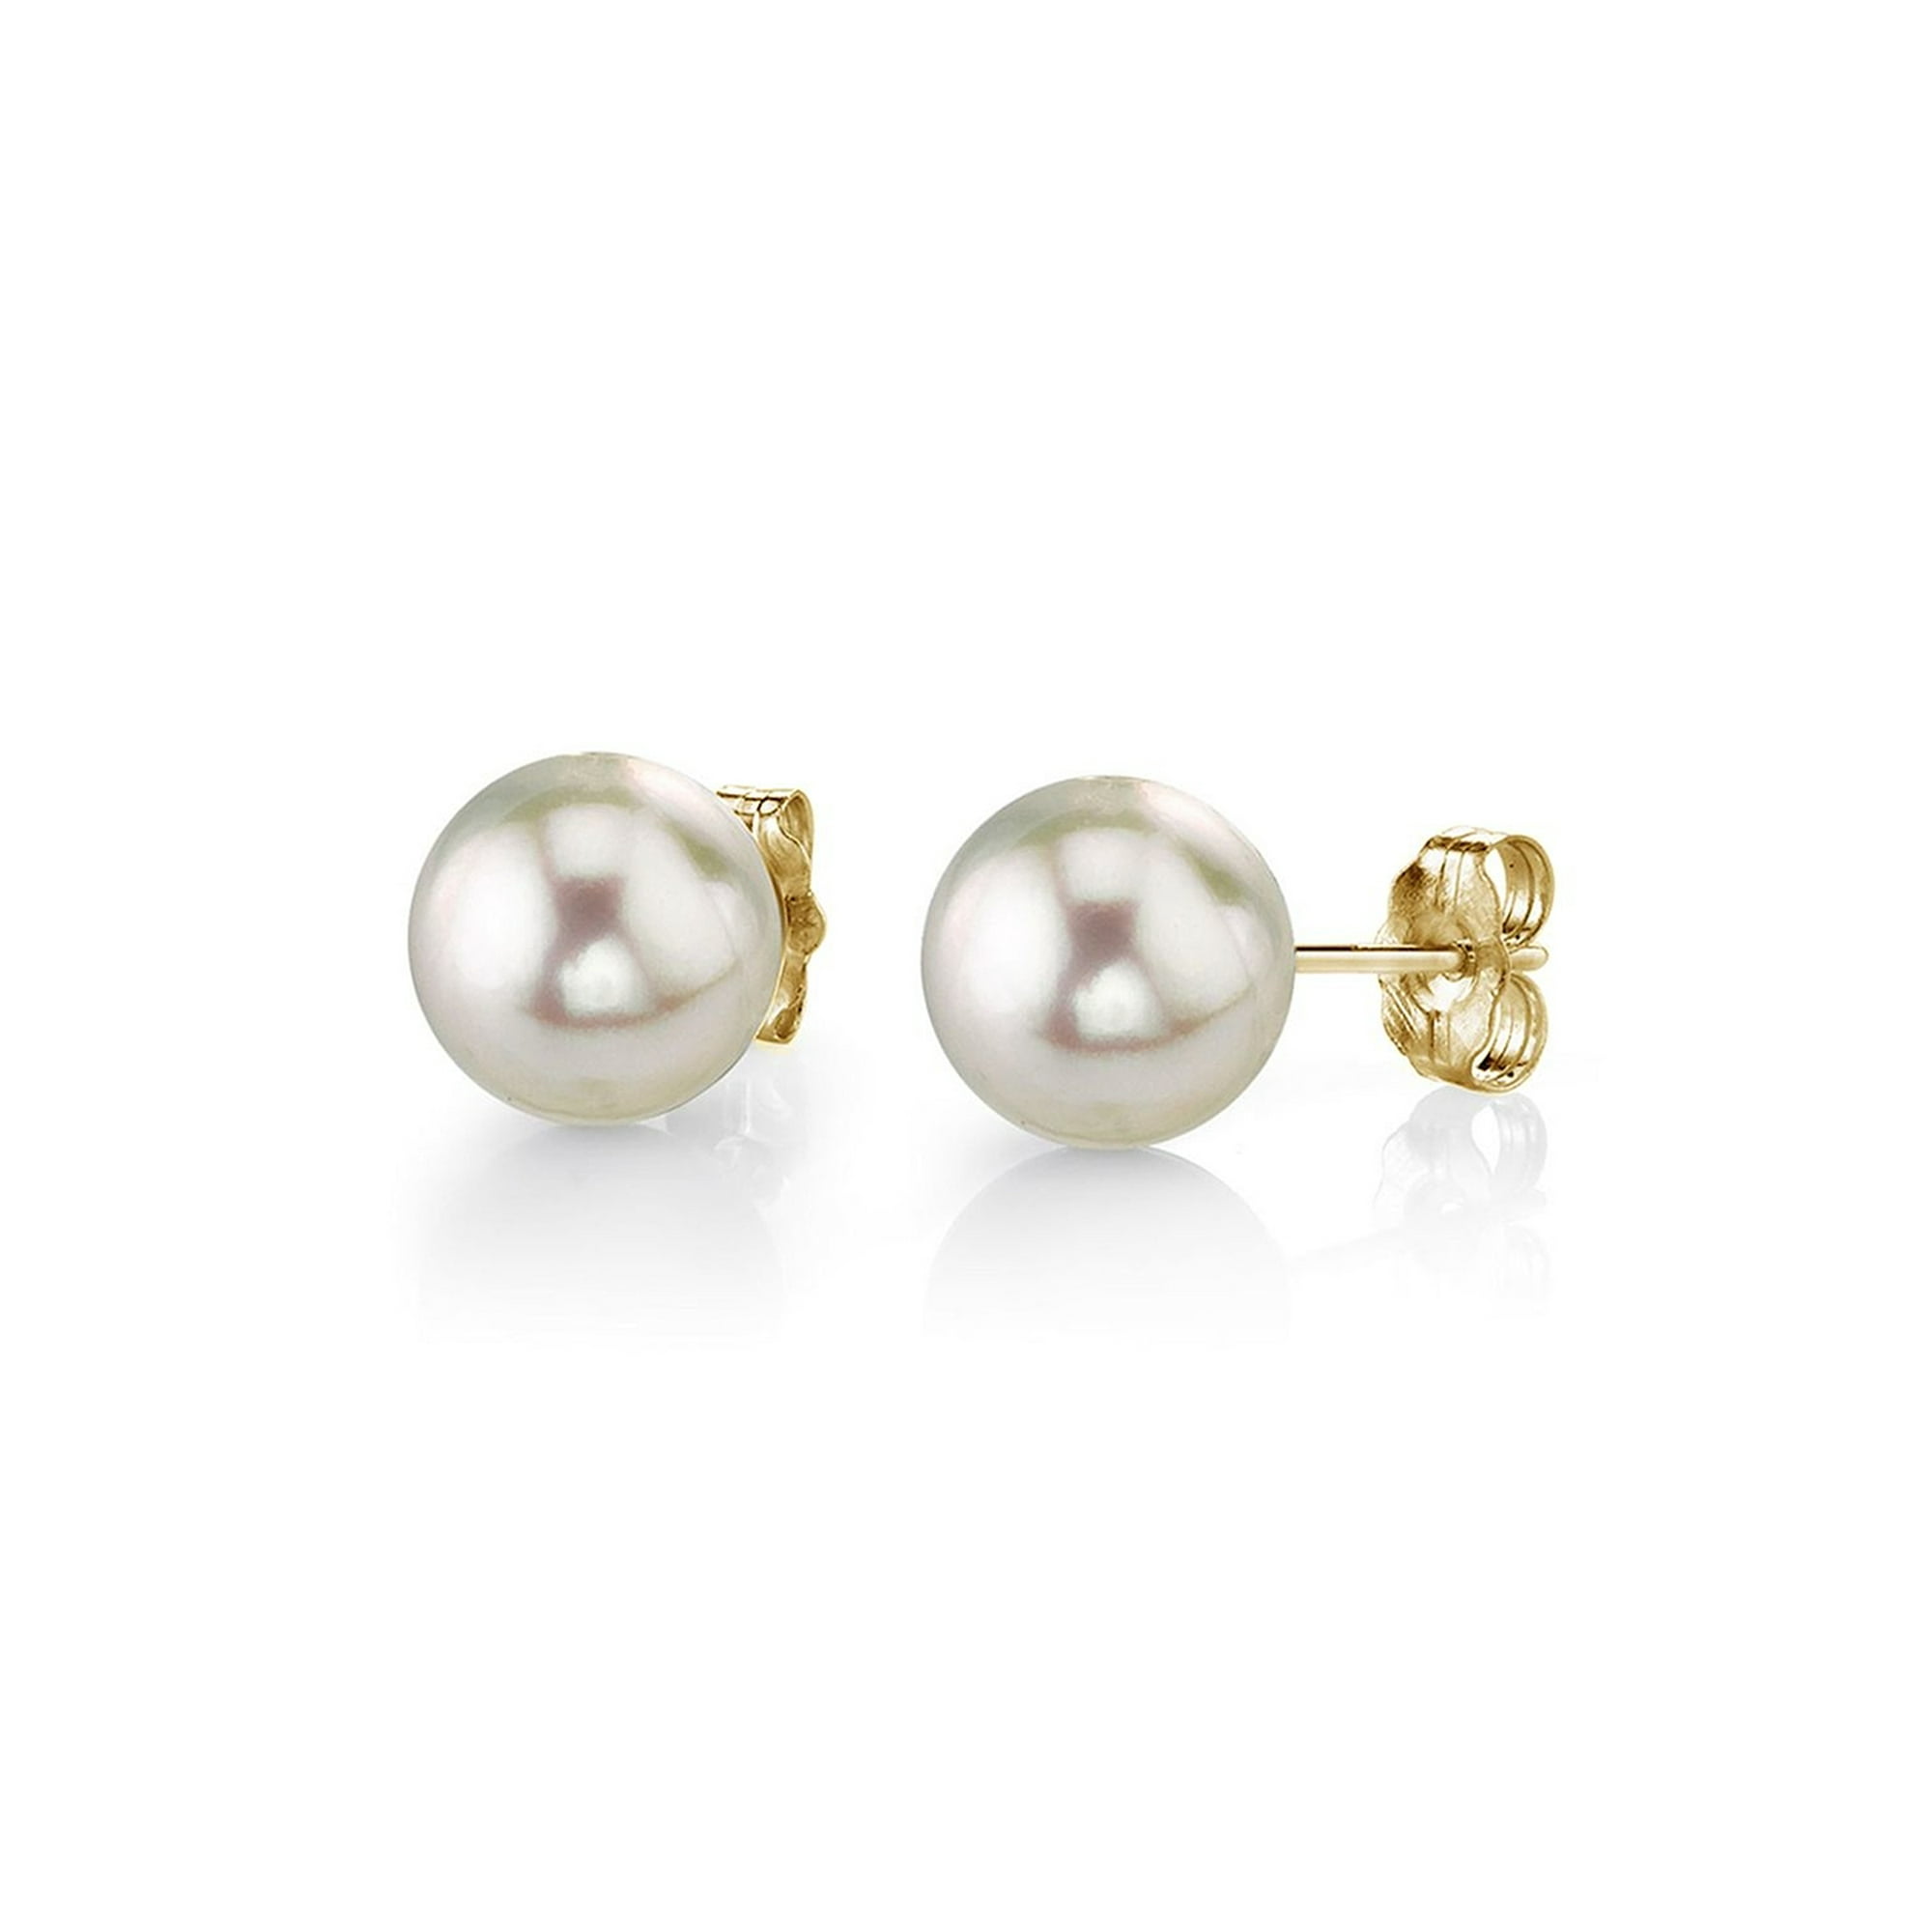 White Japanese Akoya Round Pearl Stud Earrings, 7.0-7.5mm 18K Yellow Gold / 7.0-7.5mm AAA Quality